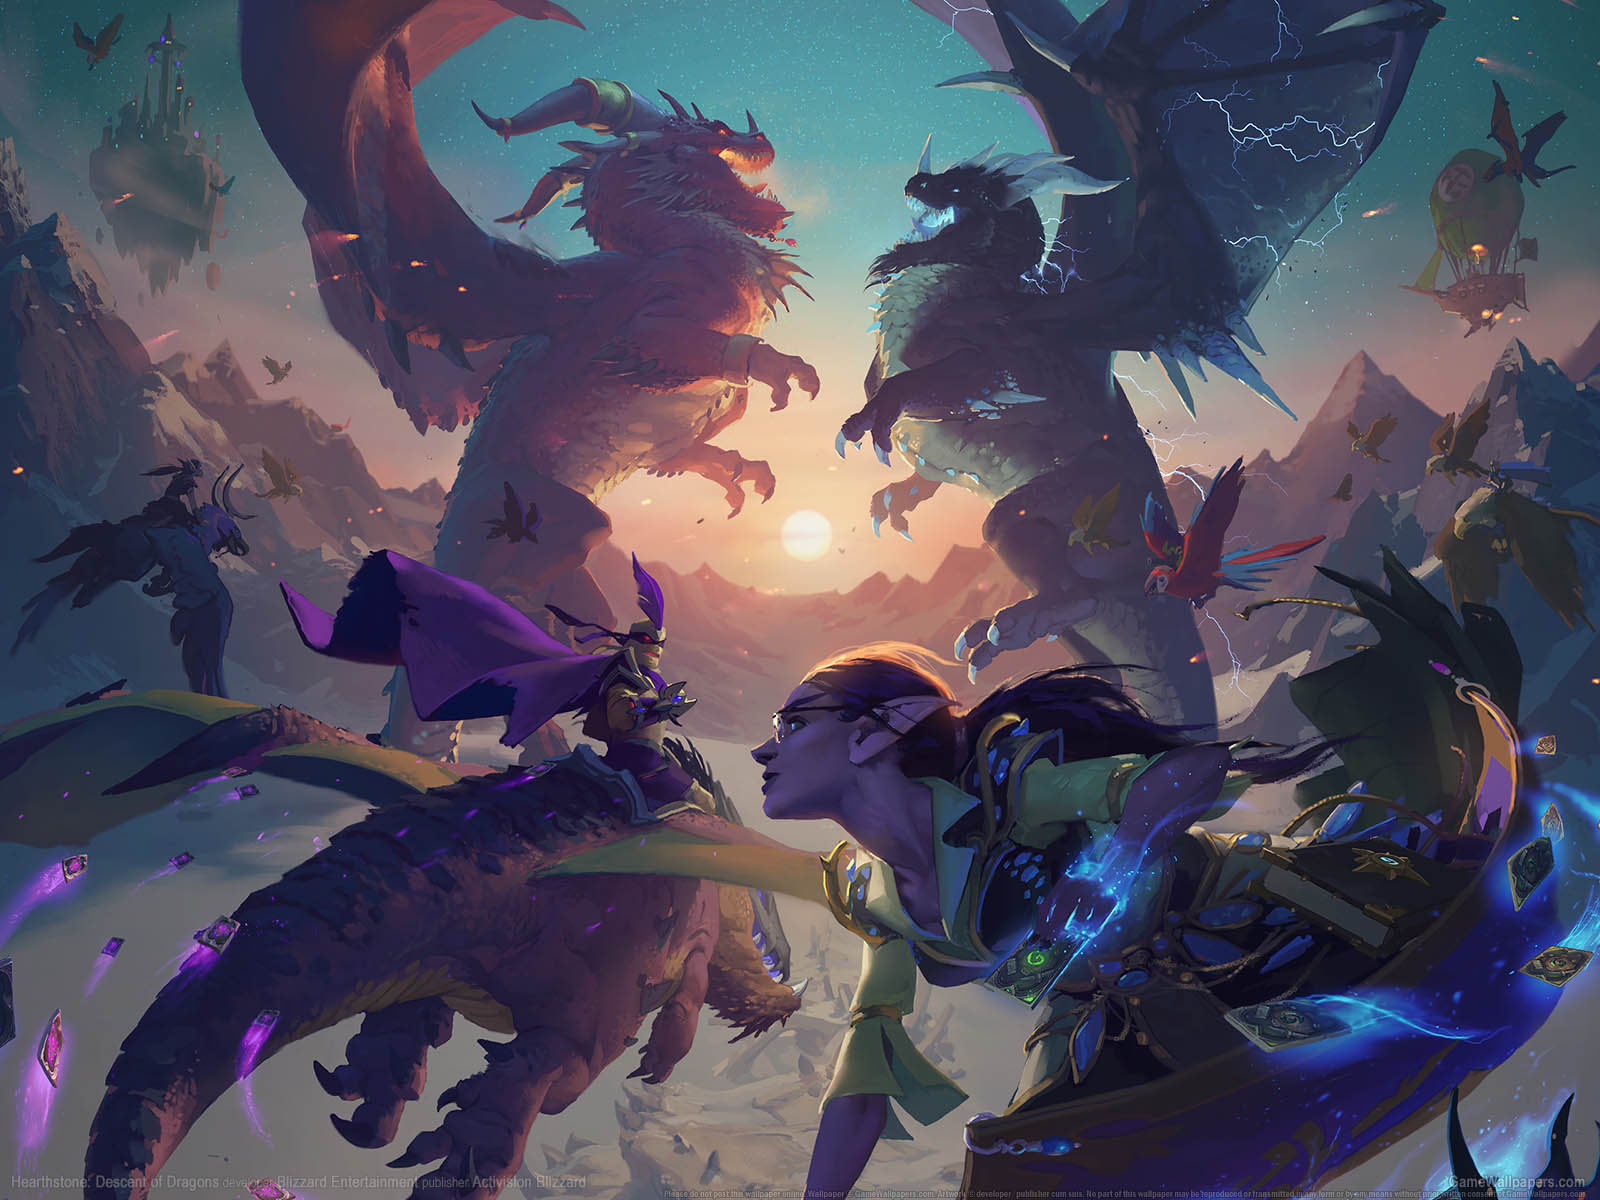 Hearthstone%253A Descent of Dragons wallpaper 01 1600x1200